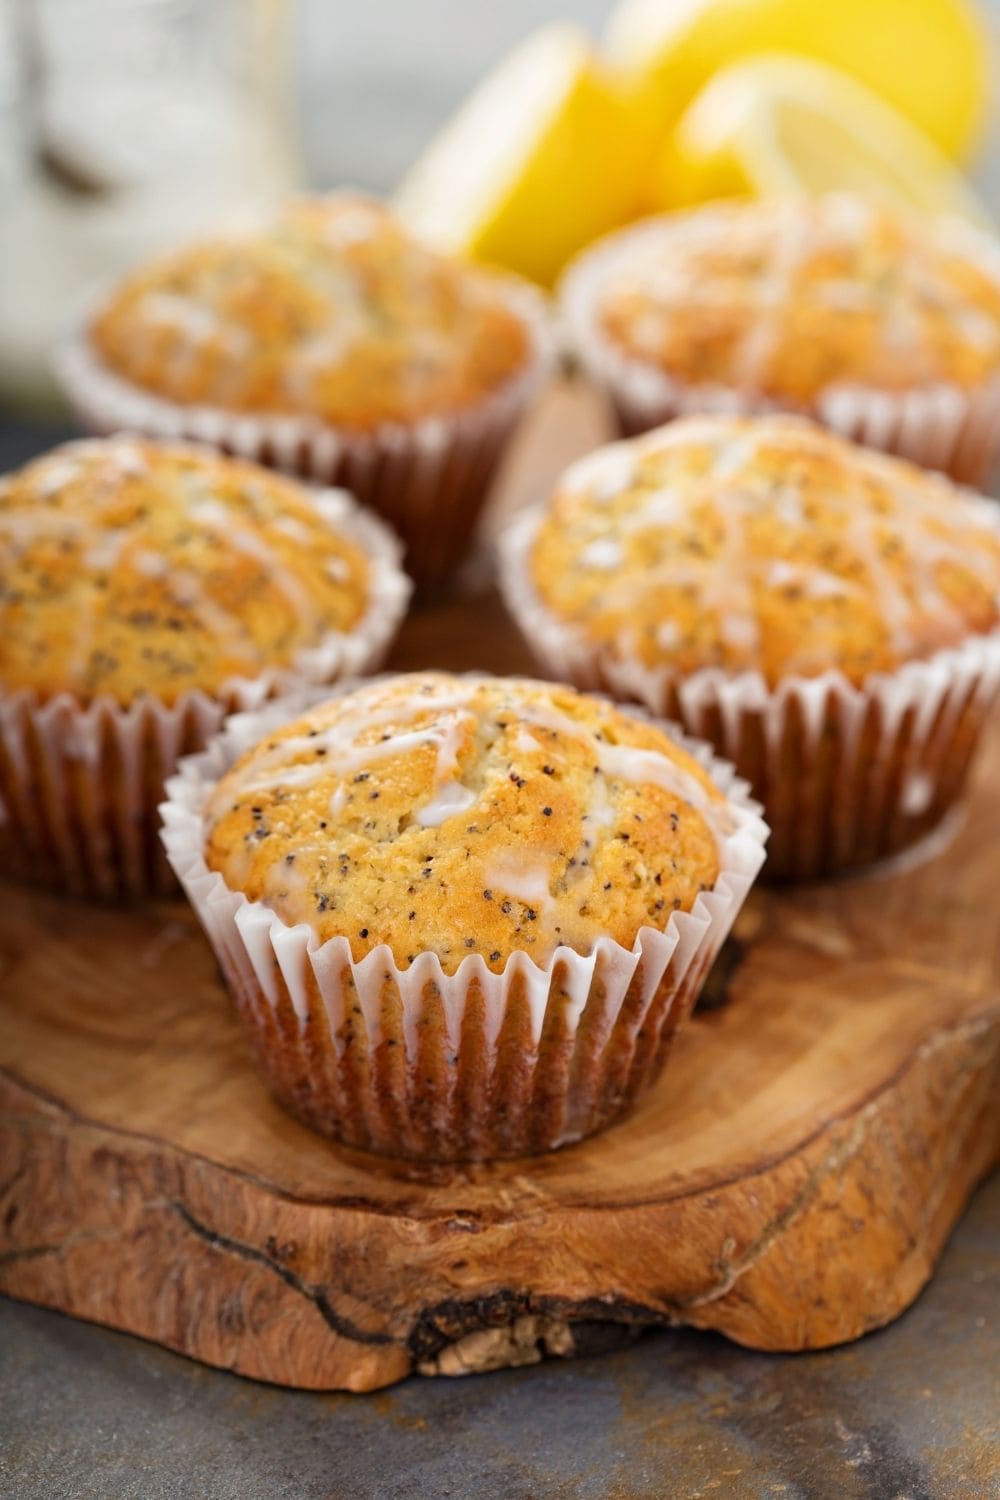 30 Best Muffin Recipes to Put on Repeat: Lemon Poppy Seed Muffins with Sweet Glaze